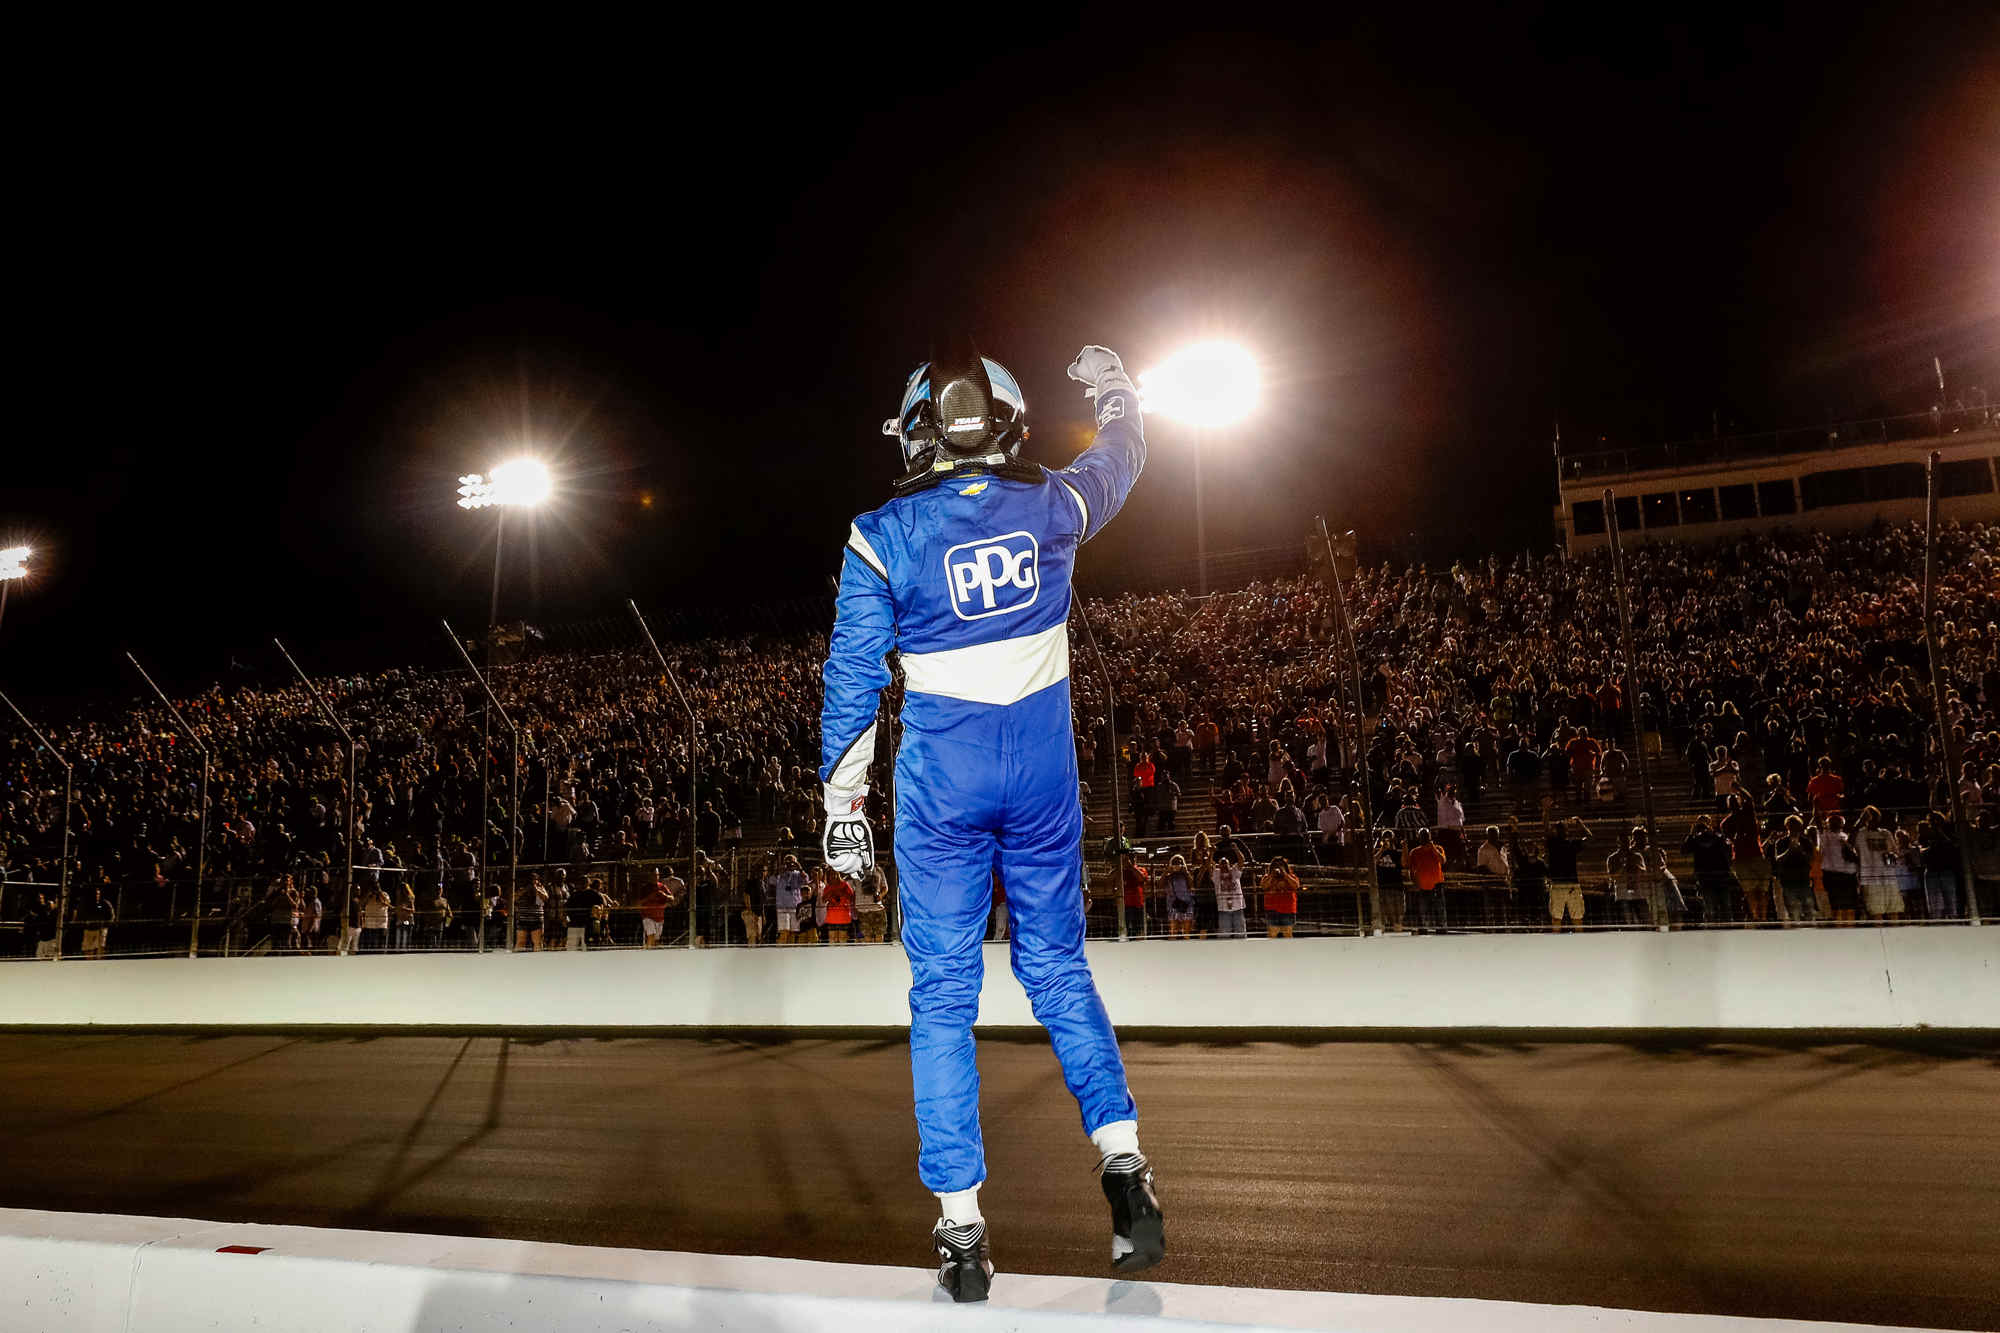 Newgarden waves to the crowd